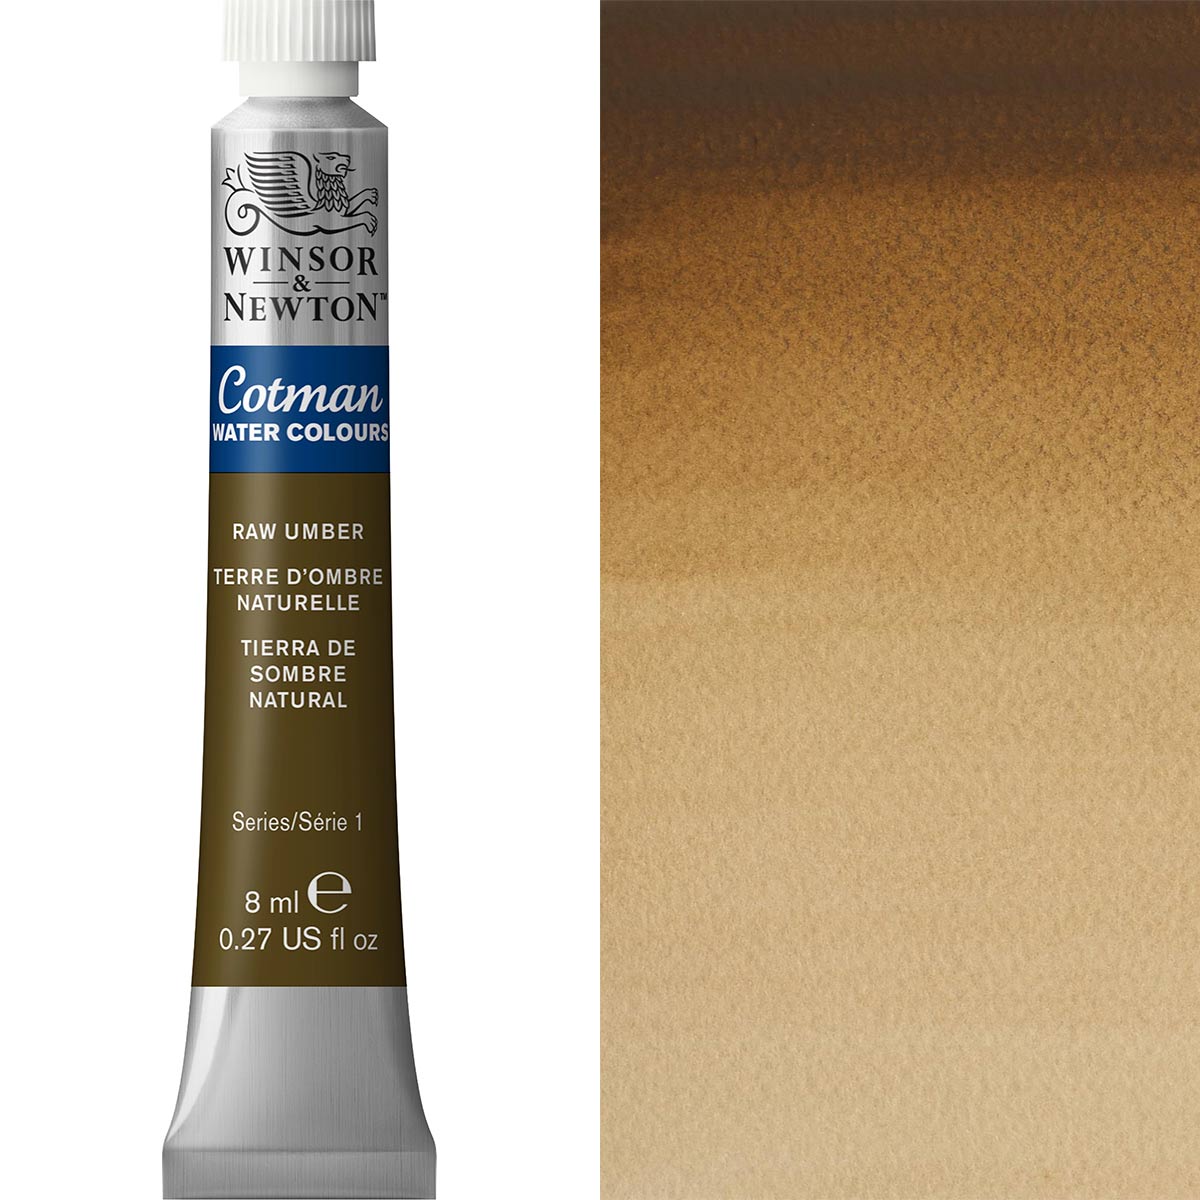 Winsor and Newton - Cotman Watercolour - 8ml - Raw Umber